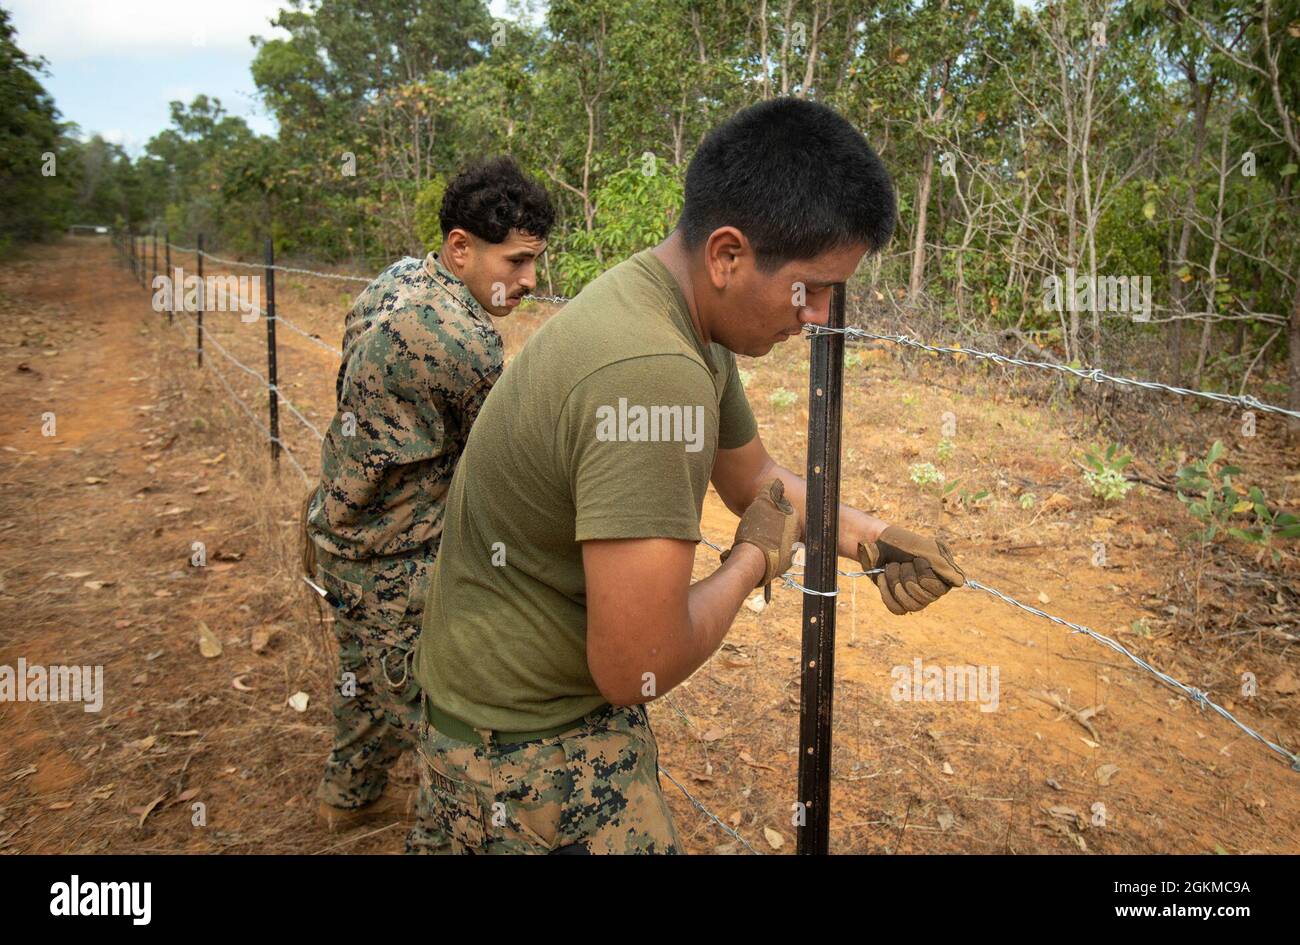 U.S. Marine Corps Lance Cpl. David Sotelo, right, and Cpl. David Padilla, left, both combat engineers with Combat Logistics Battalion 7, Marine Rotational Force – Darwin, build a barbed wire fence during exercise Crocodile Response at Point Fawcett, NT, Australia, May 25, 2021. Exercise Crocodile Response tested the ability of MRF-D and the Australian Defence Force to provide disaster relief in the Indo-Pacific region. The rotational deployment of U.S. Marines affords a combined training opportunity with Australia and improves cooperation and integration between the two country’s forces. Stock Photo